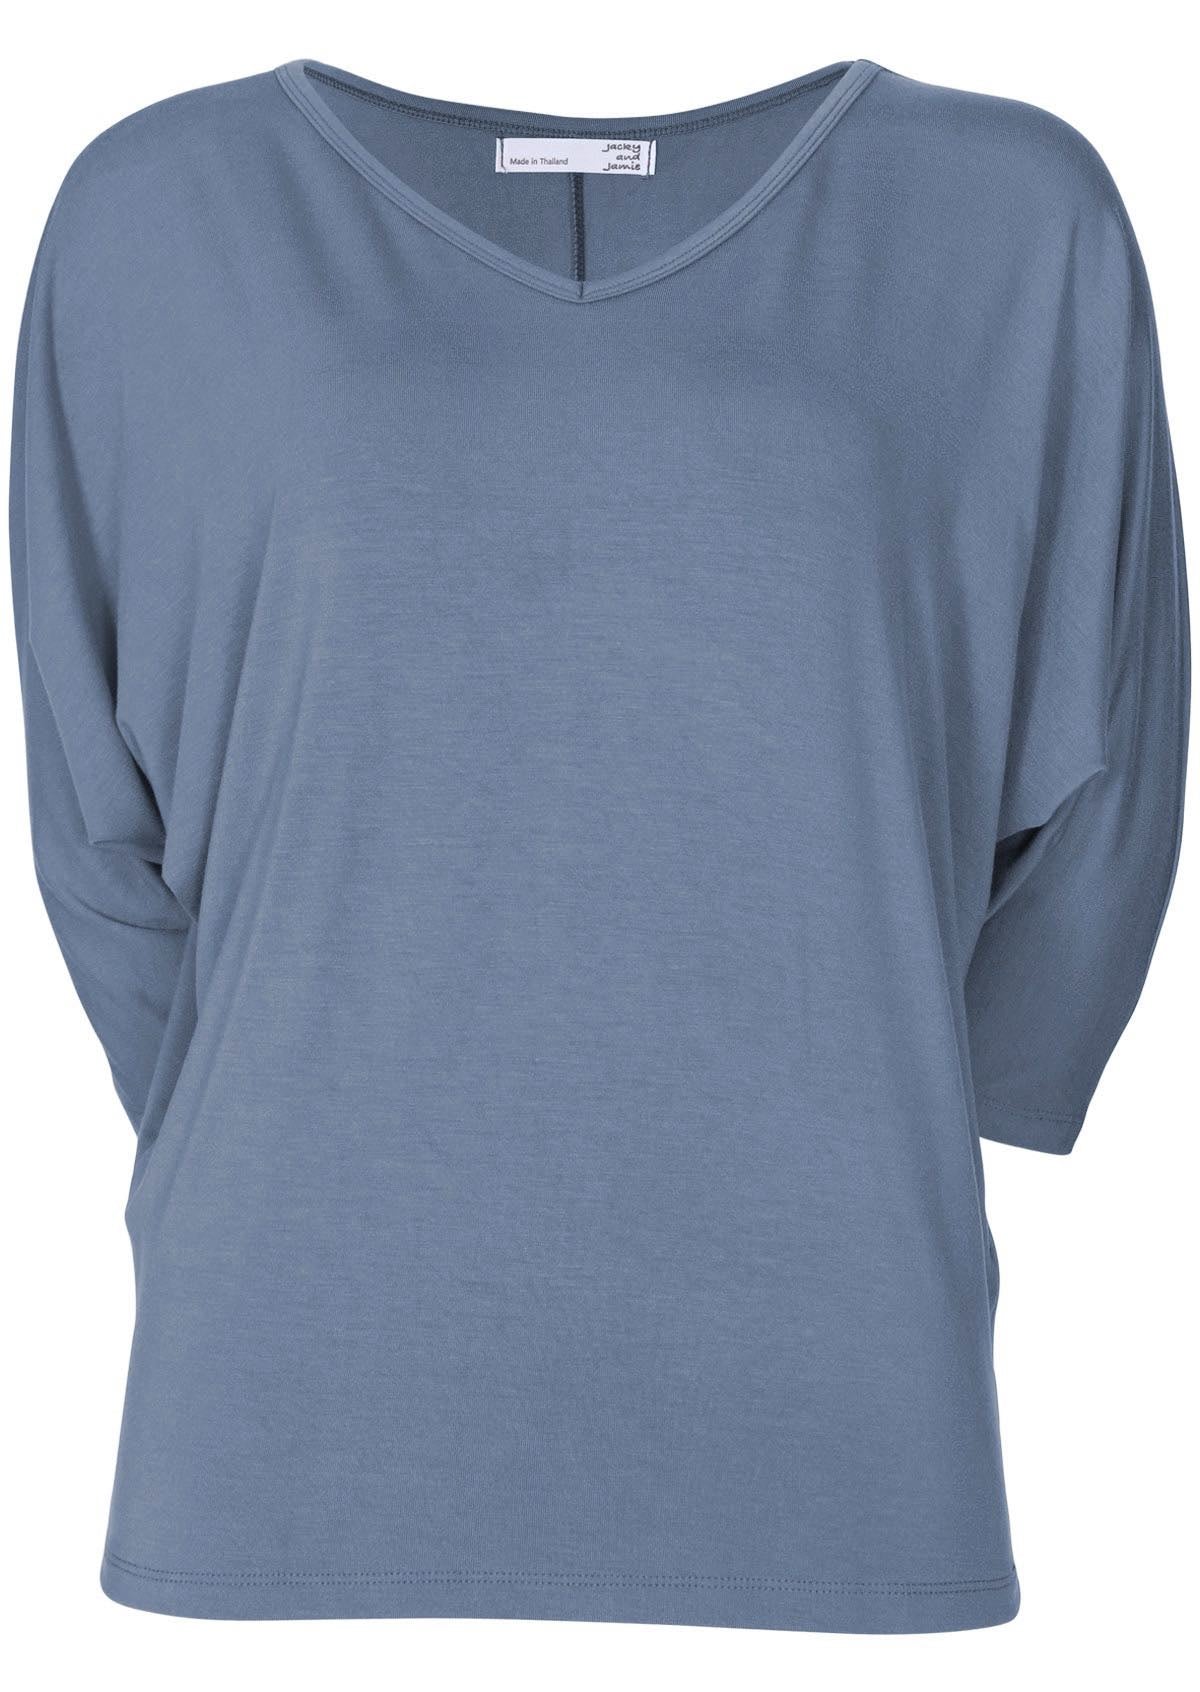 Front view of women's 3/4 sleeve rayon batwing v-neck grey top.